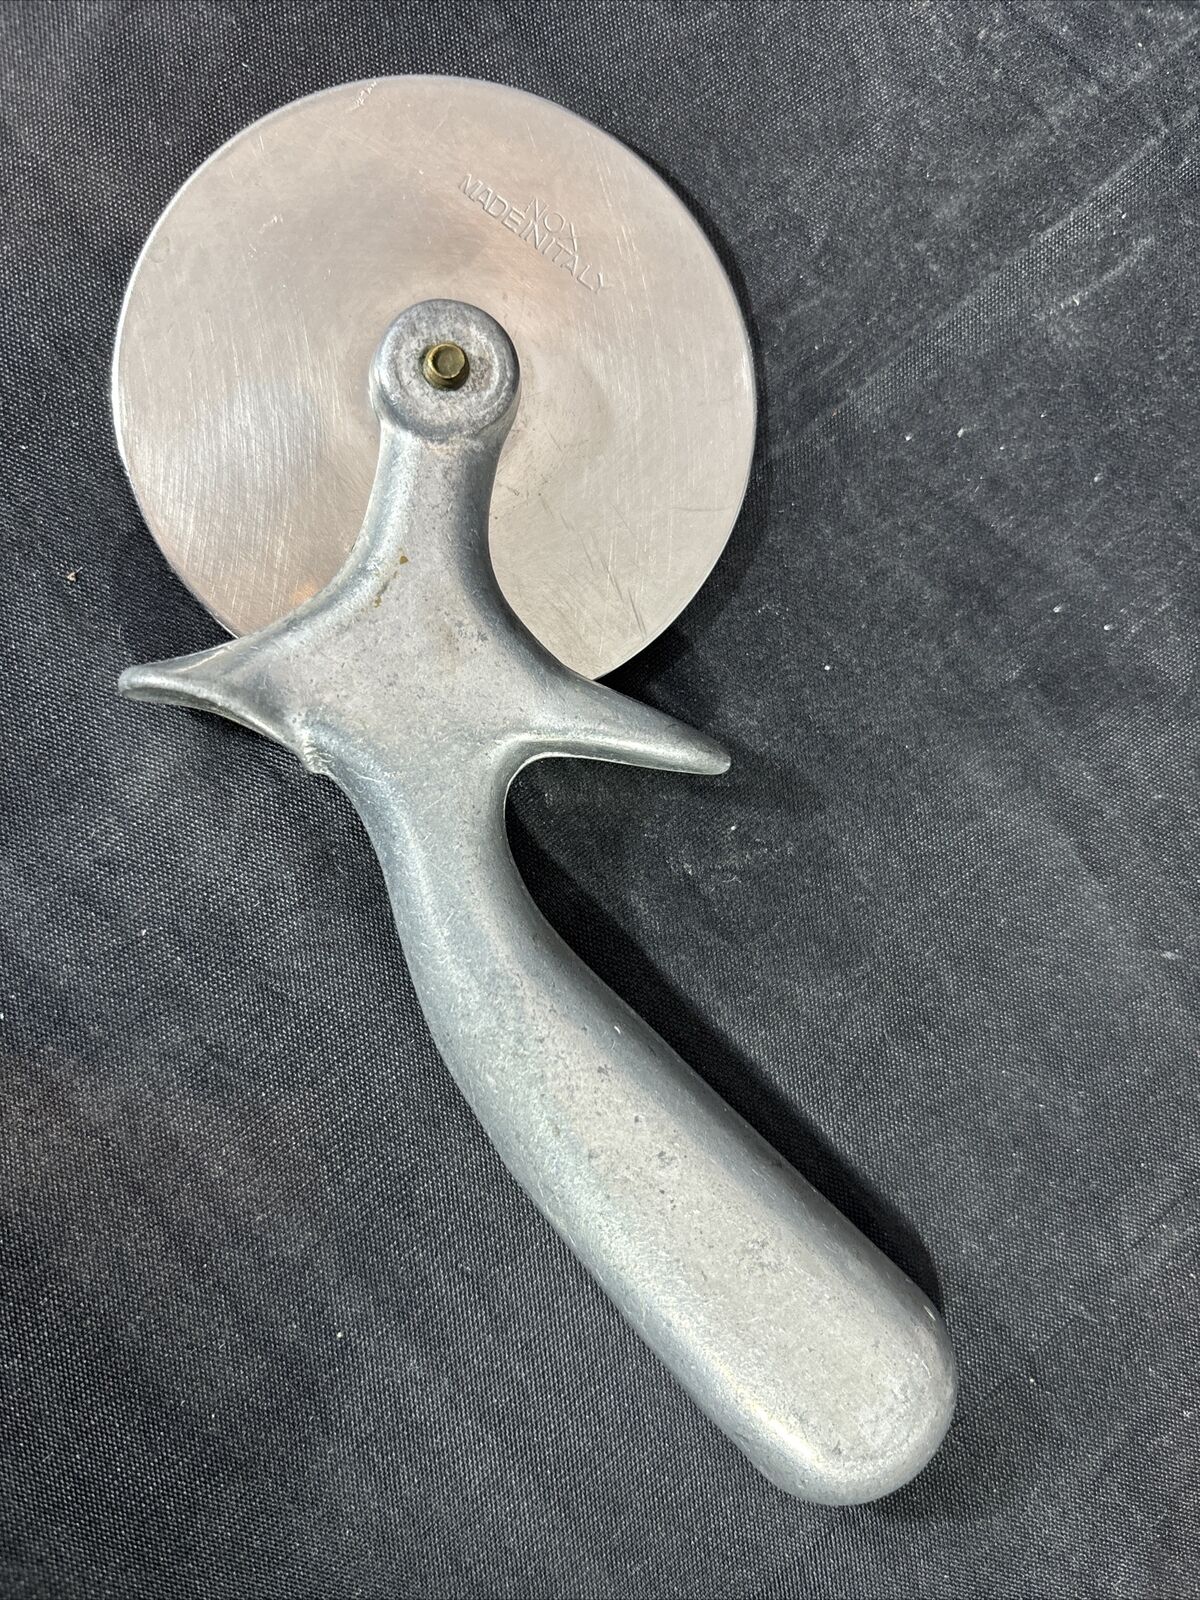 Vintage INOX Cast Aluminum & Stainless Steel Pizza Cutter Slicer